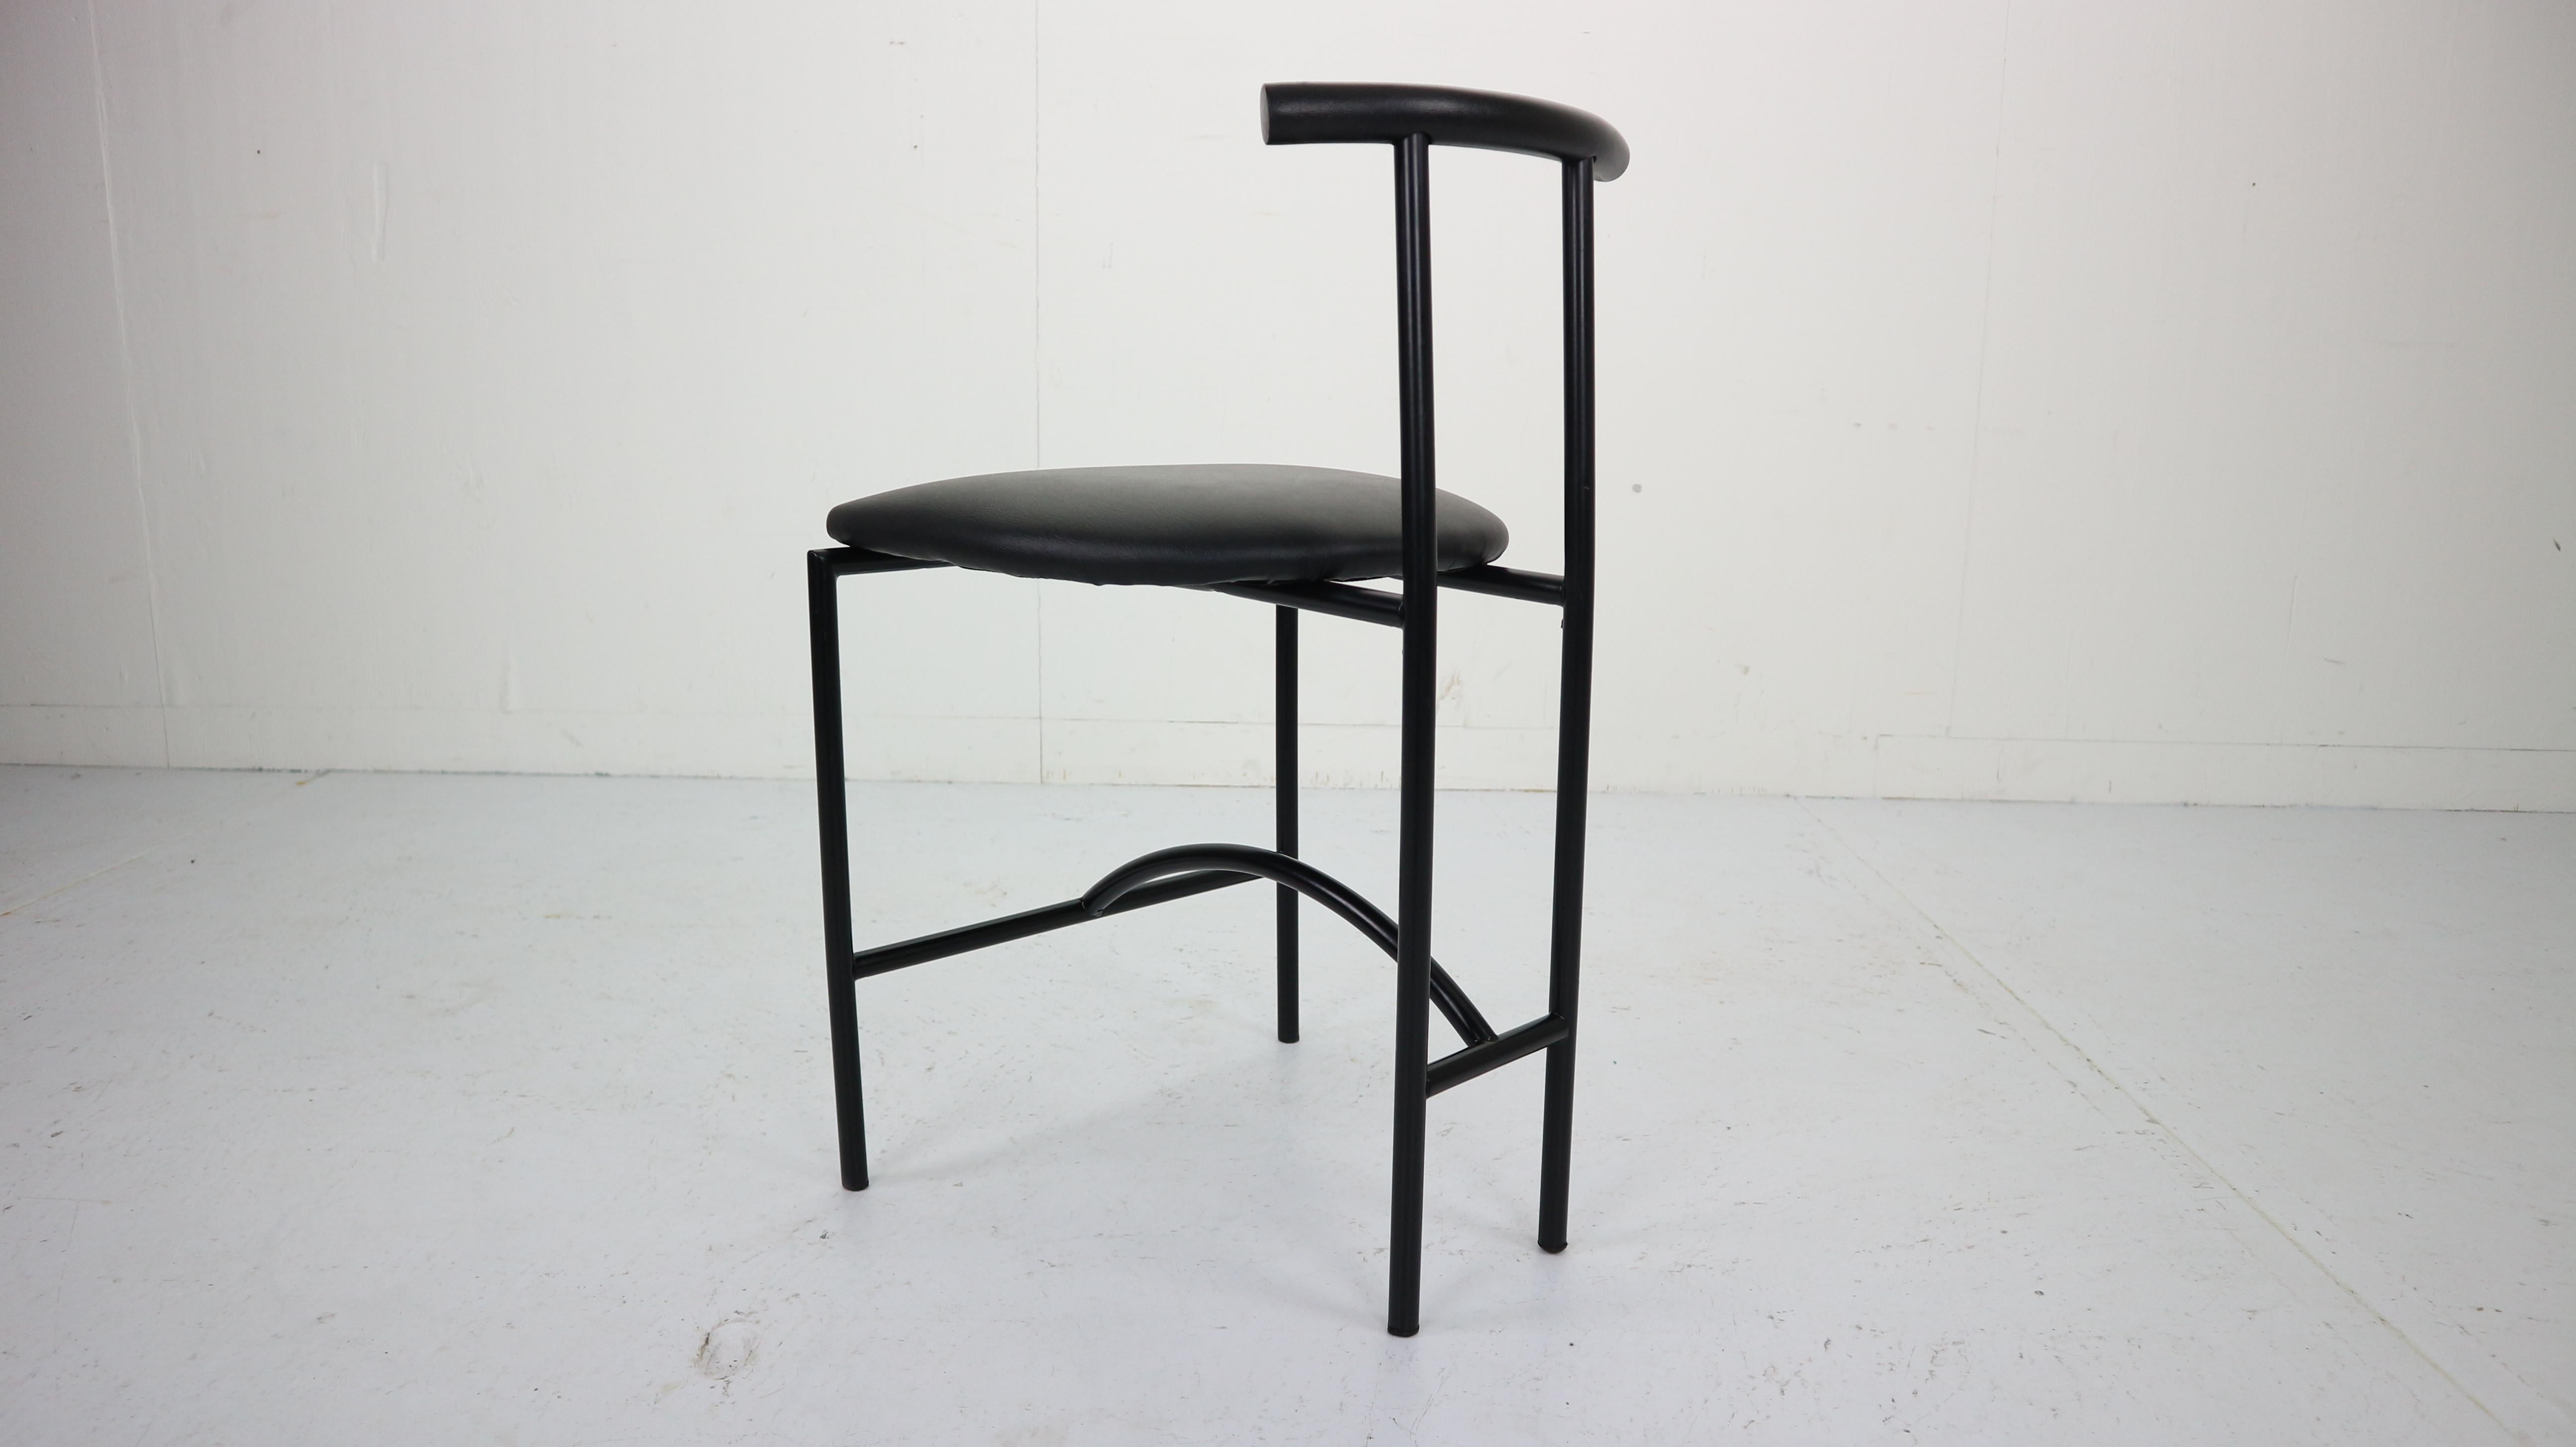 A Tokyo chair designed by Rodney Kinsman for Italian manufacturer, Bieffeplast. Original, 1980s edition. Powder coated tubular black frames with black rubber back rests and black newly upholstered faux leather seatings. 
Available quantity of the